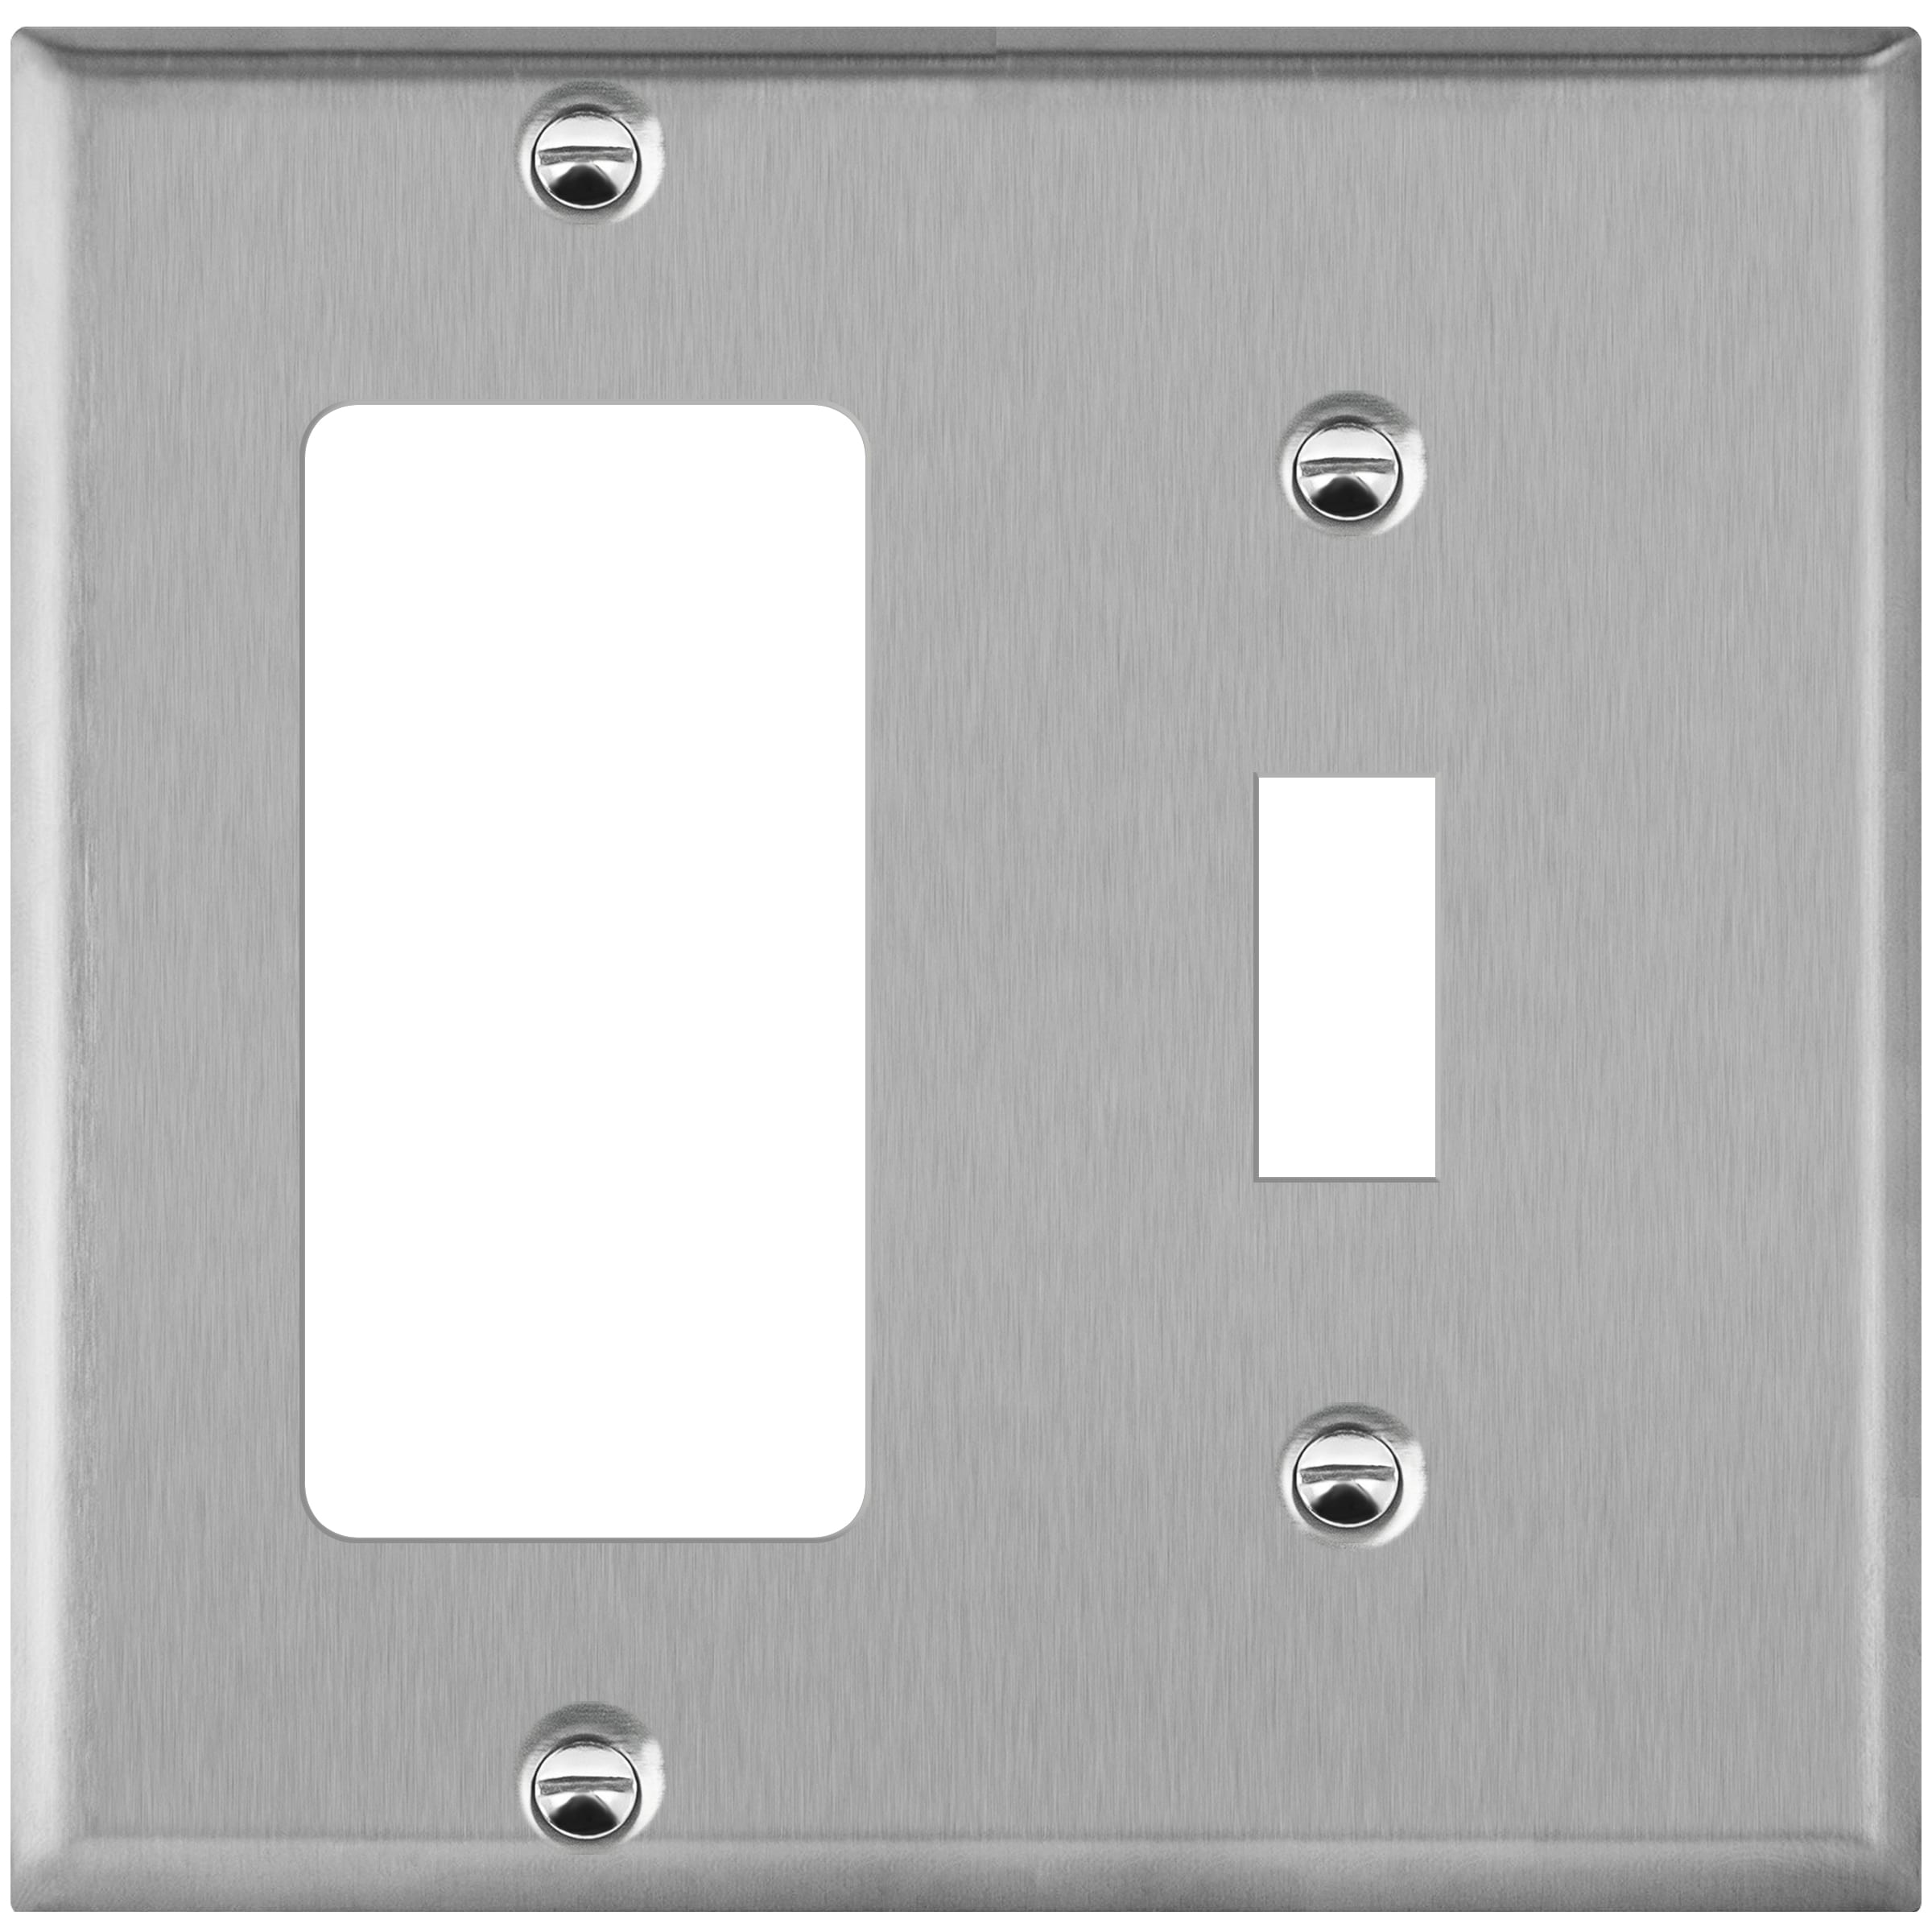 2-Gang Metal Toggle Switch/Decorator Outlet Combination Wall Plate